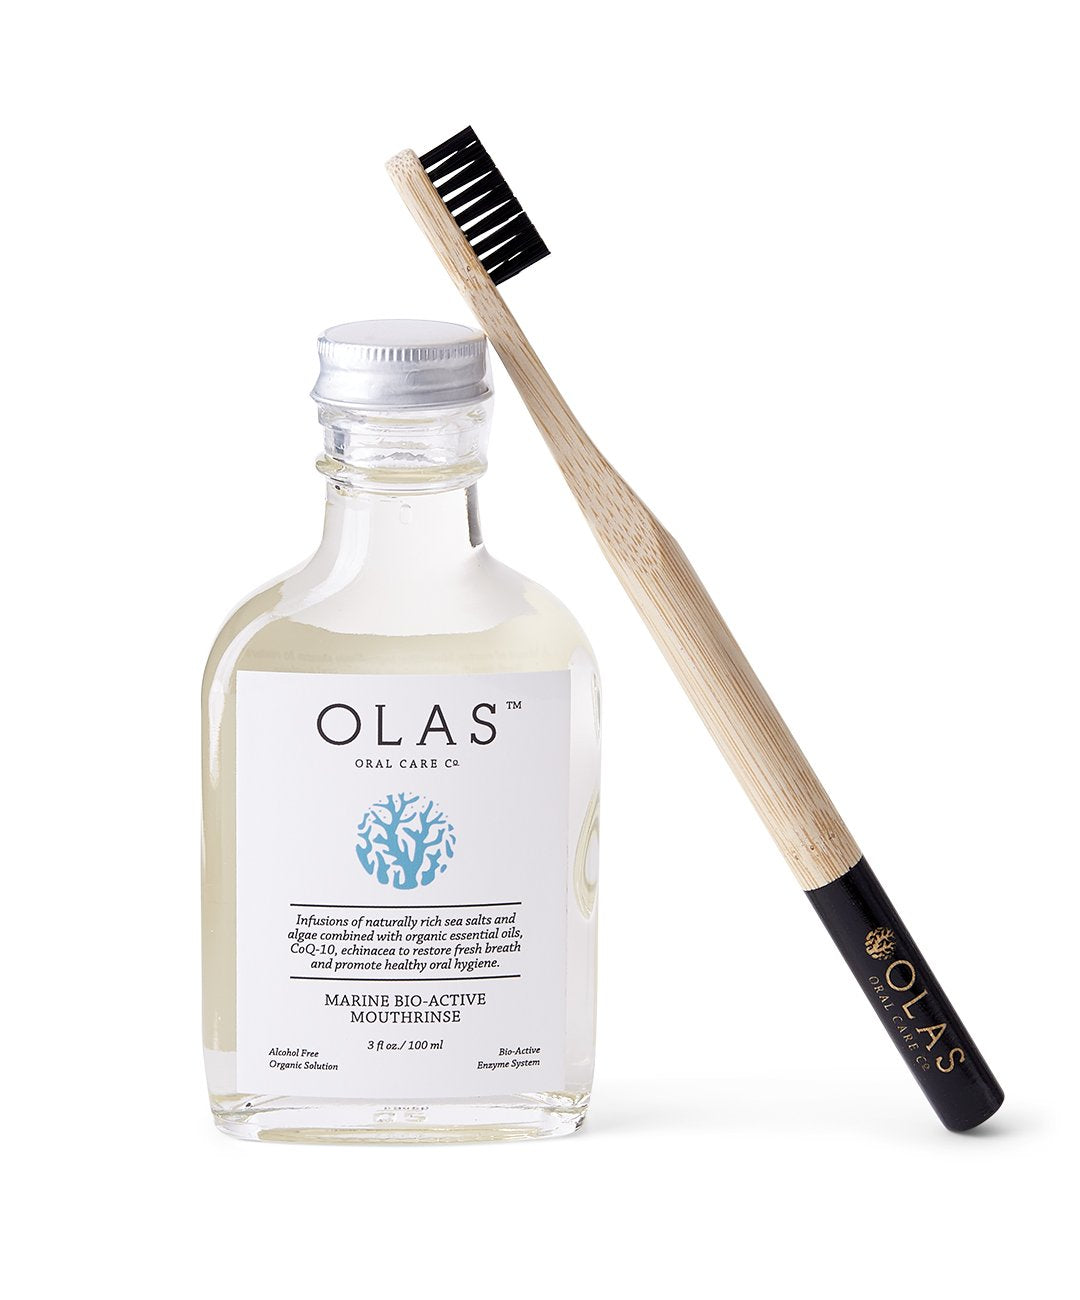 OLAS Mouthrinse and Bamboo Toothbrush, Charcoal